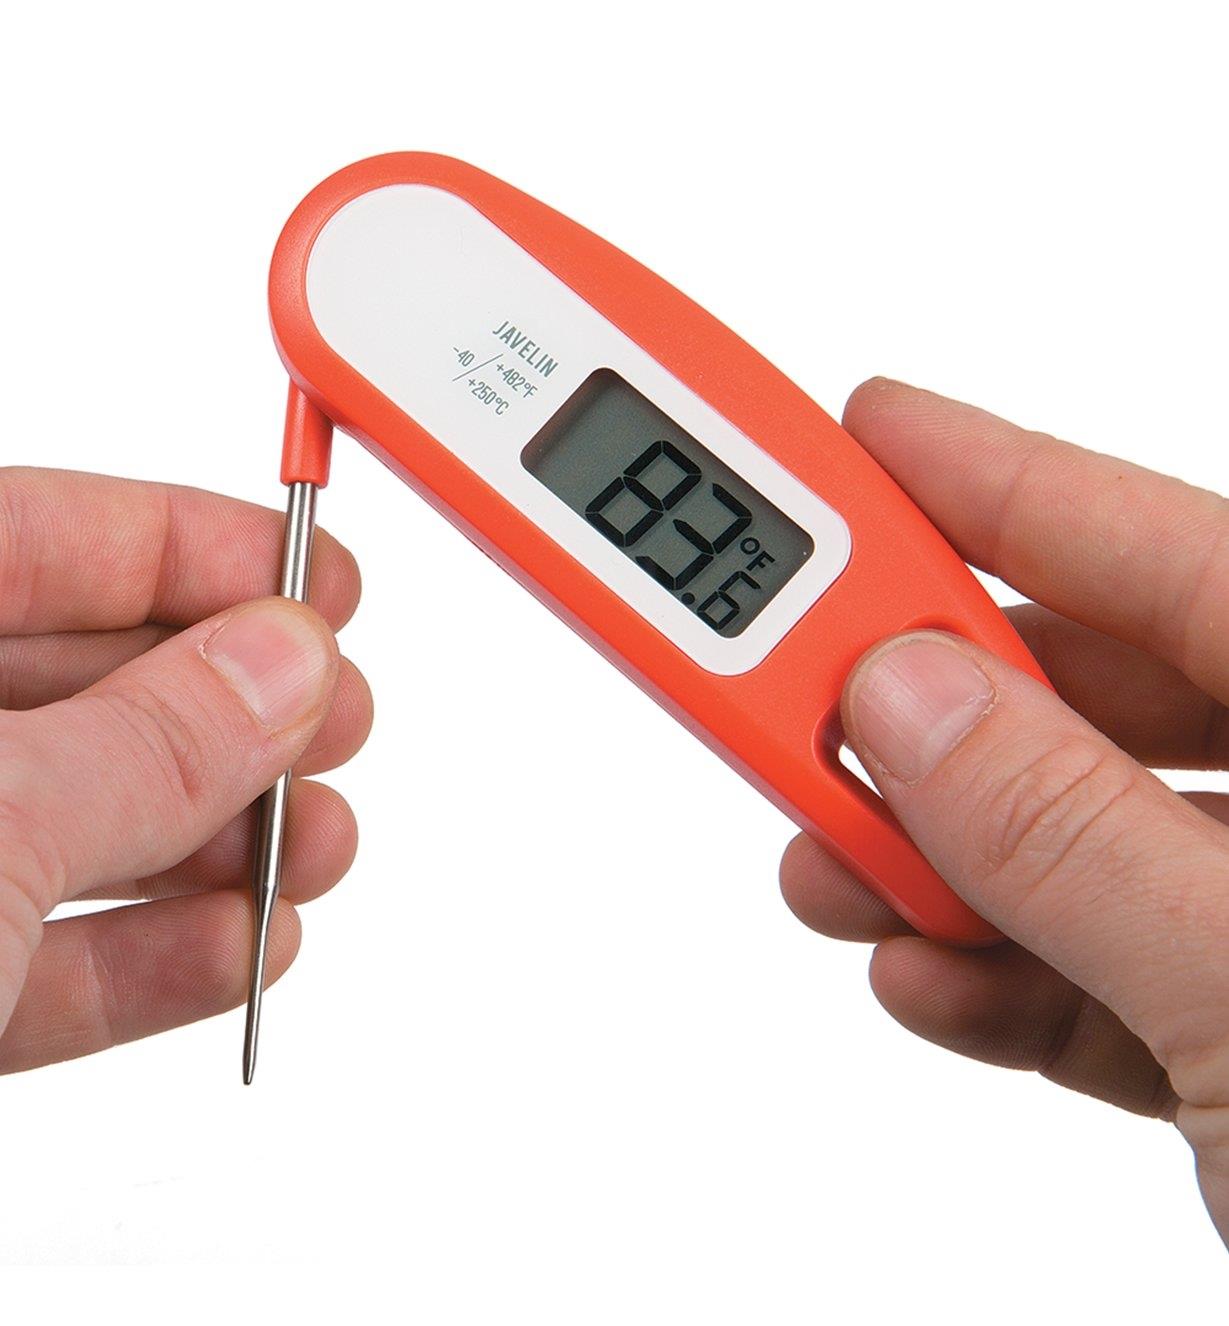 Folding the probe against the thermometer